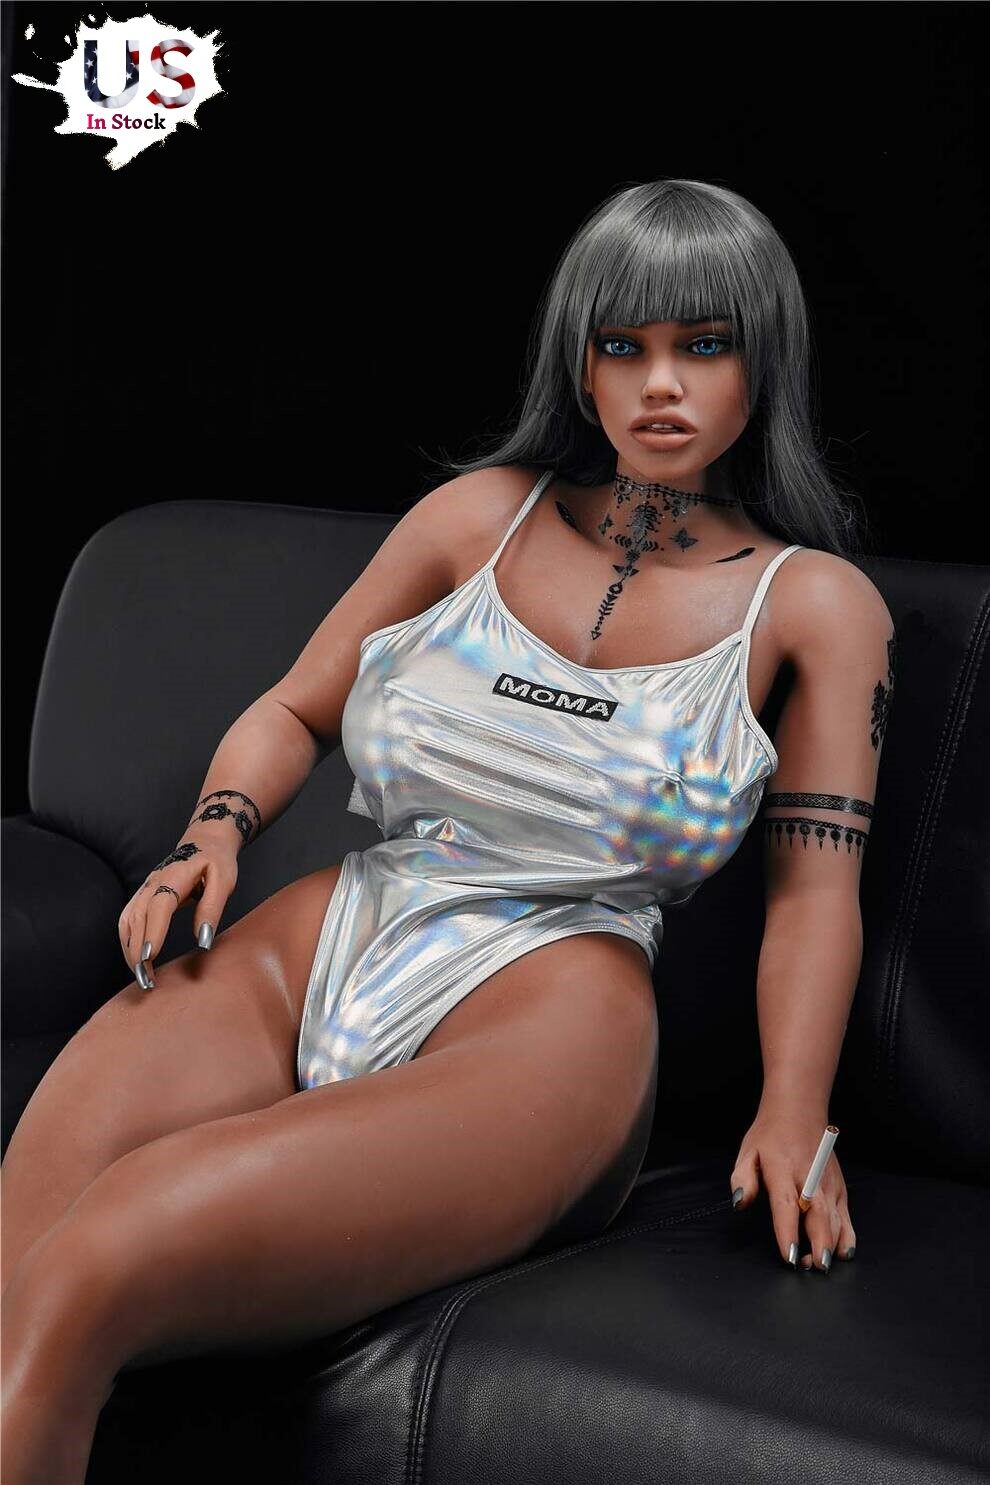 Loryn Independent 158cm(5ft2) L-Cup TPE Irontech Black/Ebony Sex Love Doll (US In Stock) image1